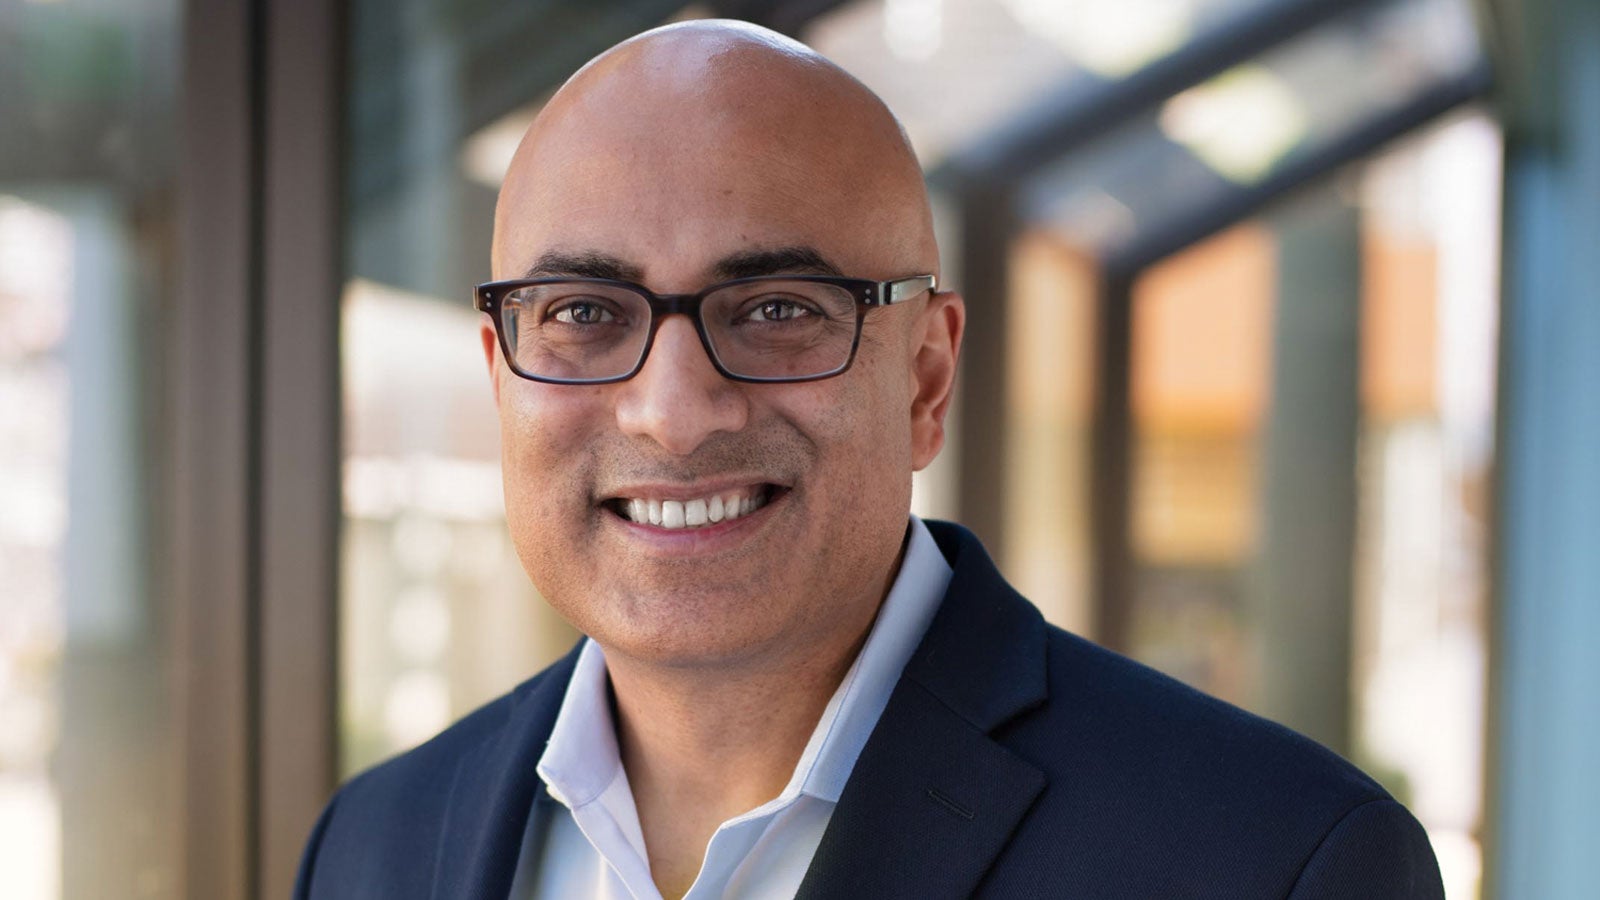 Vinay Pai BA '88 BS '88 MS '91 now serves as a senior vice president of engineering with Bill.com.